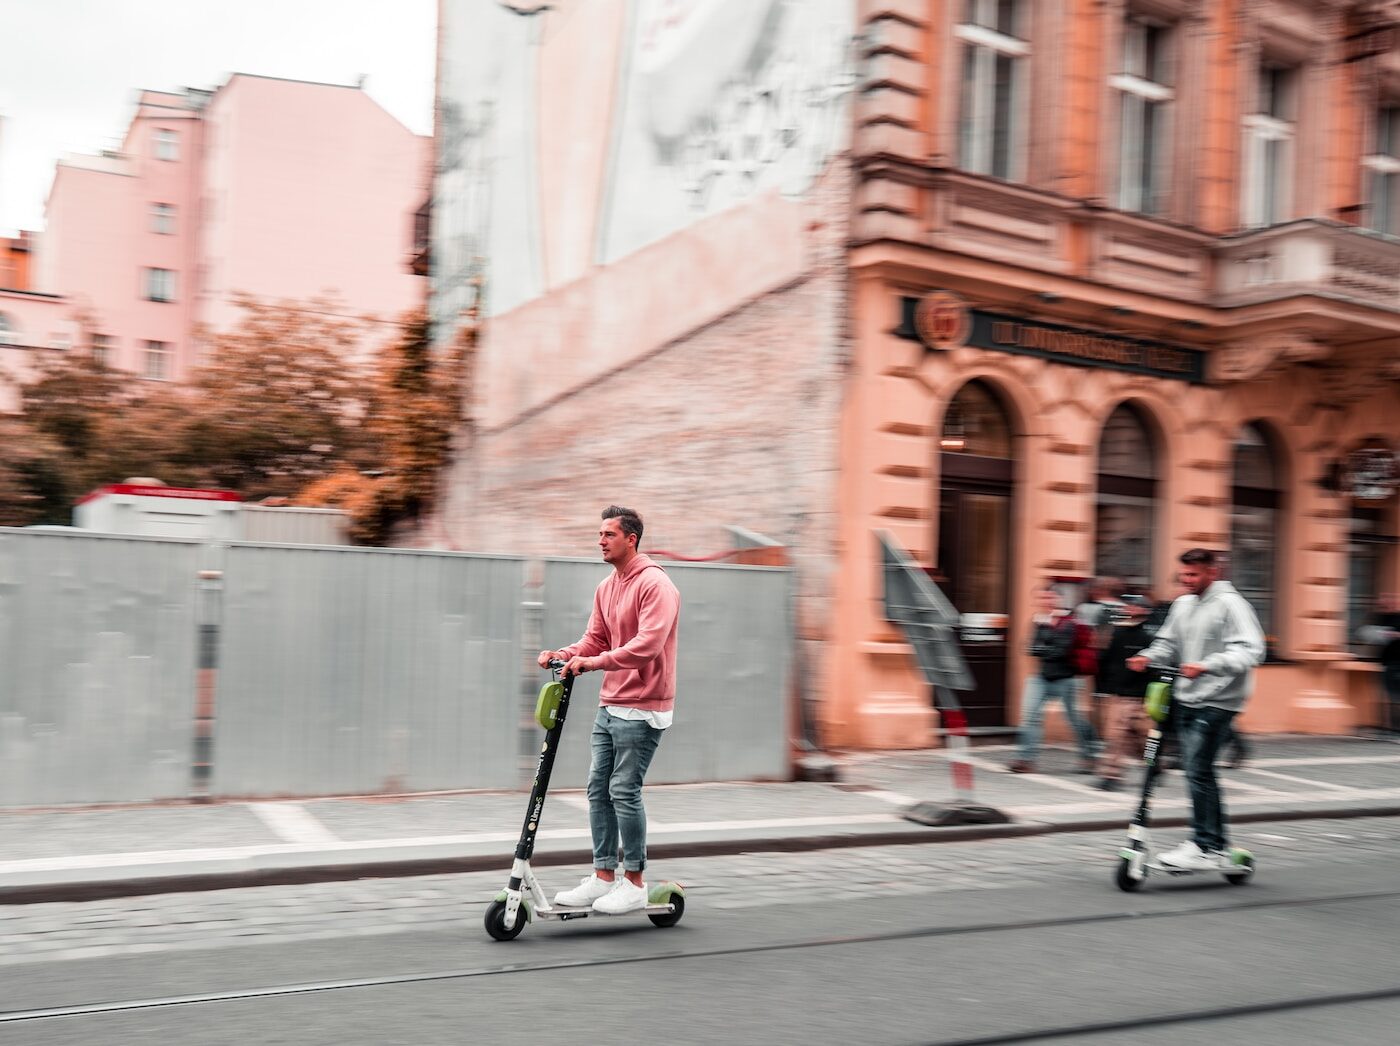 two men riding kick scooters during daytime